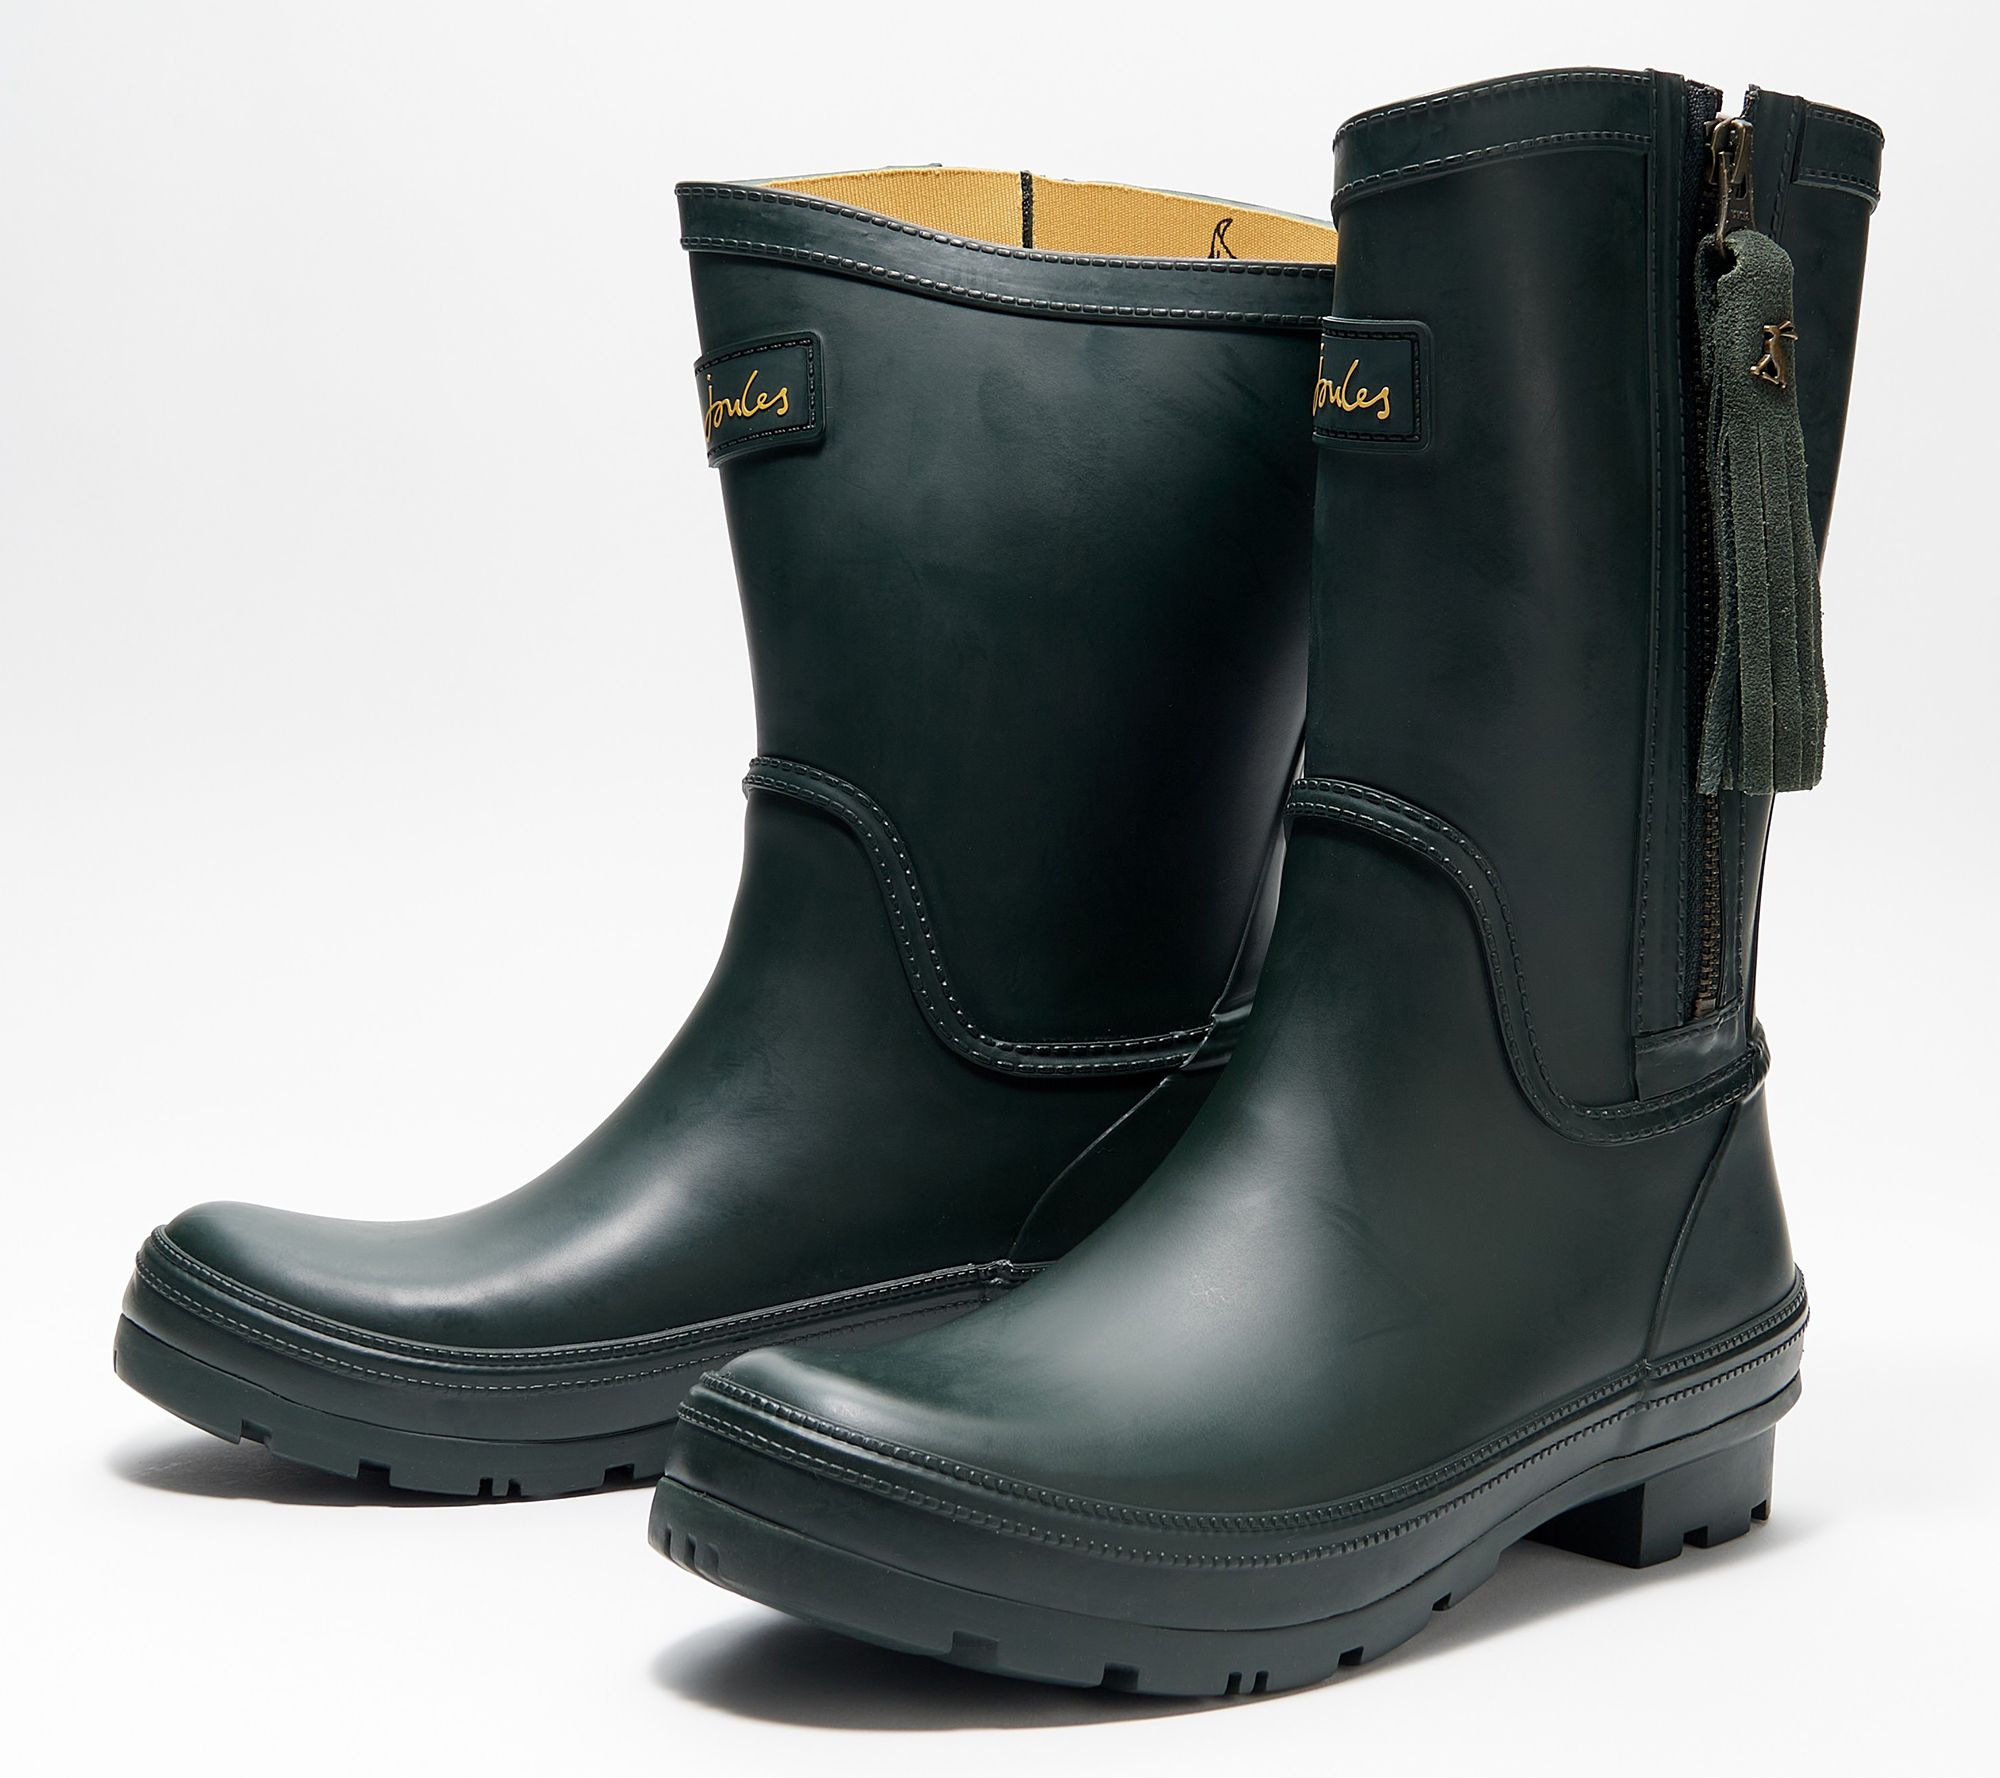 Joules Rubber Mid Boots - with Zipper - Rosalind - QVC.com